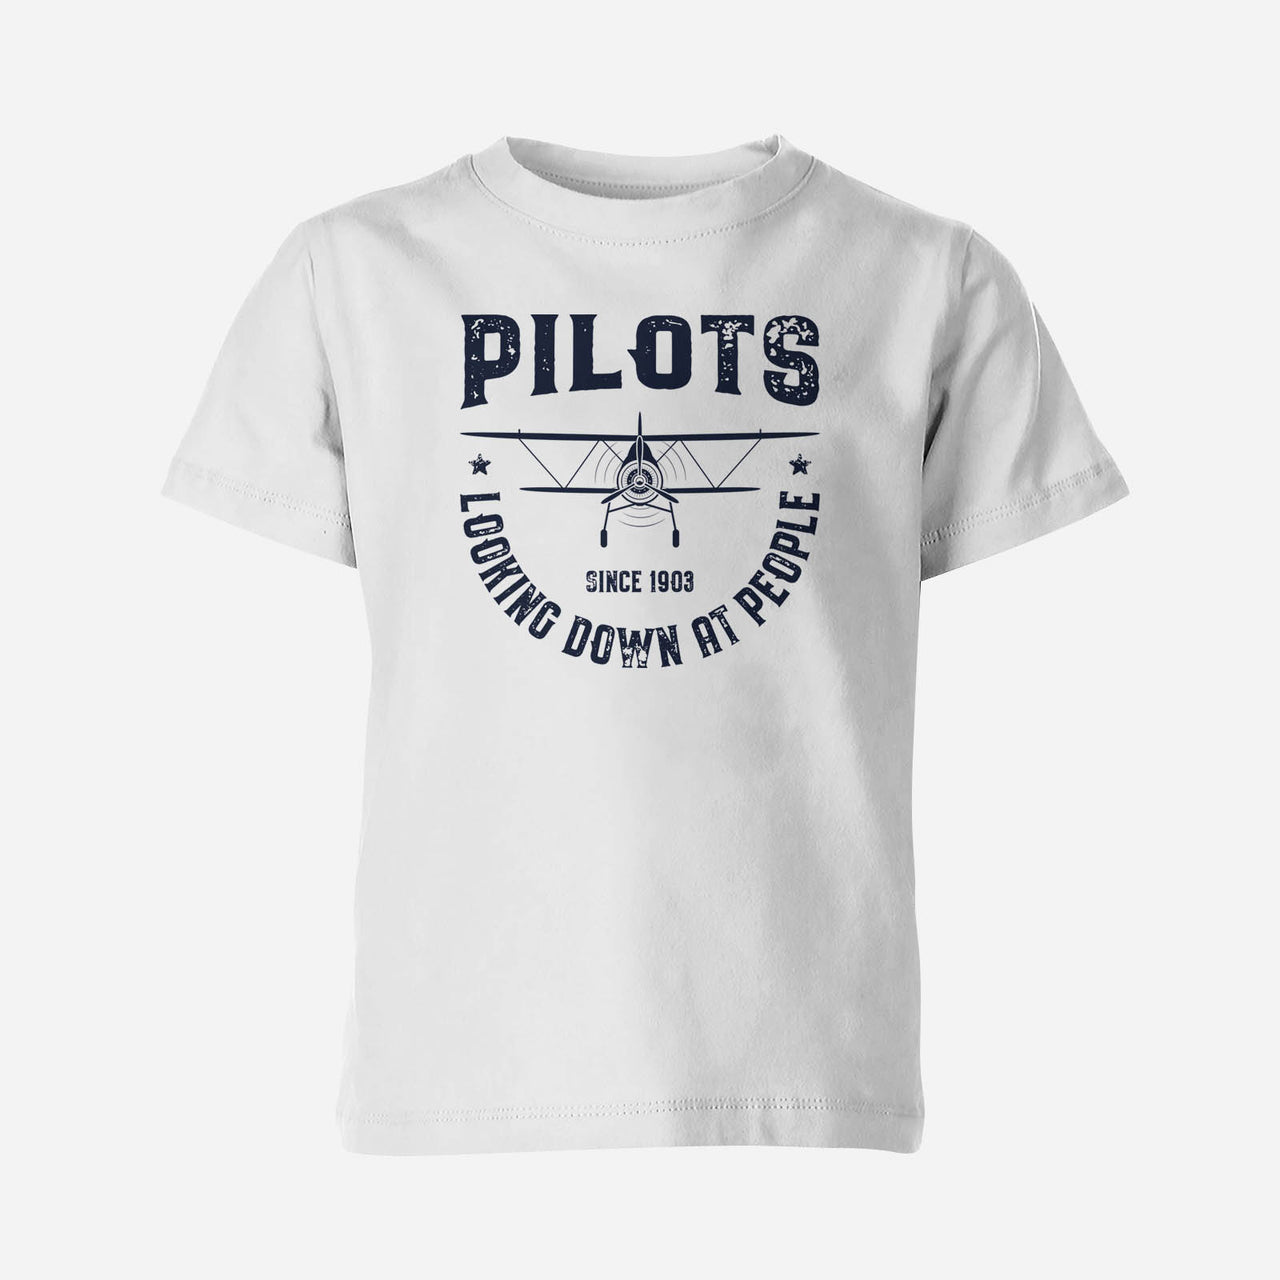 Pilots Looking Down at People Since 1903 Designed Children T-Shirts